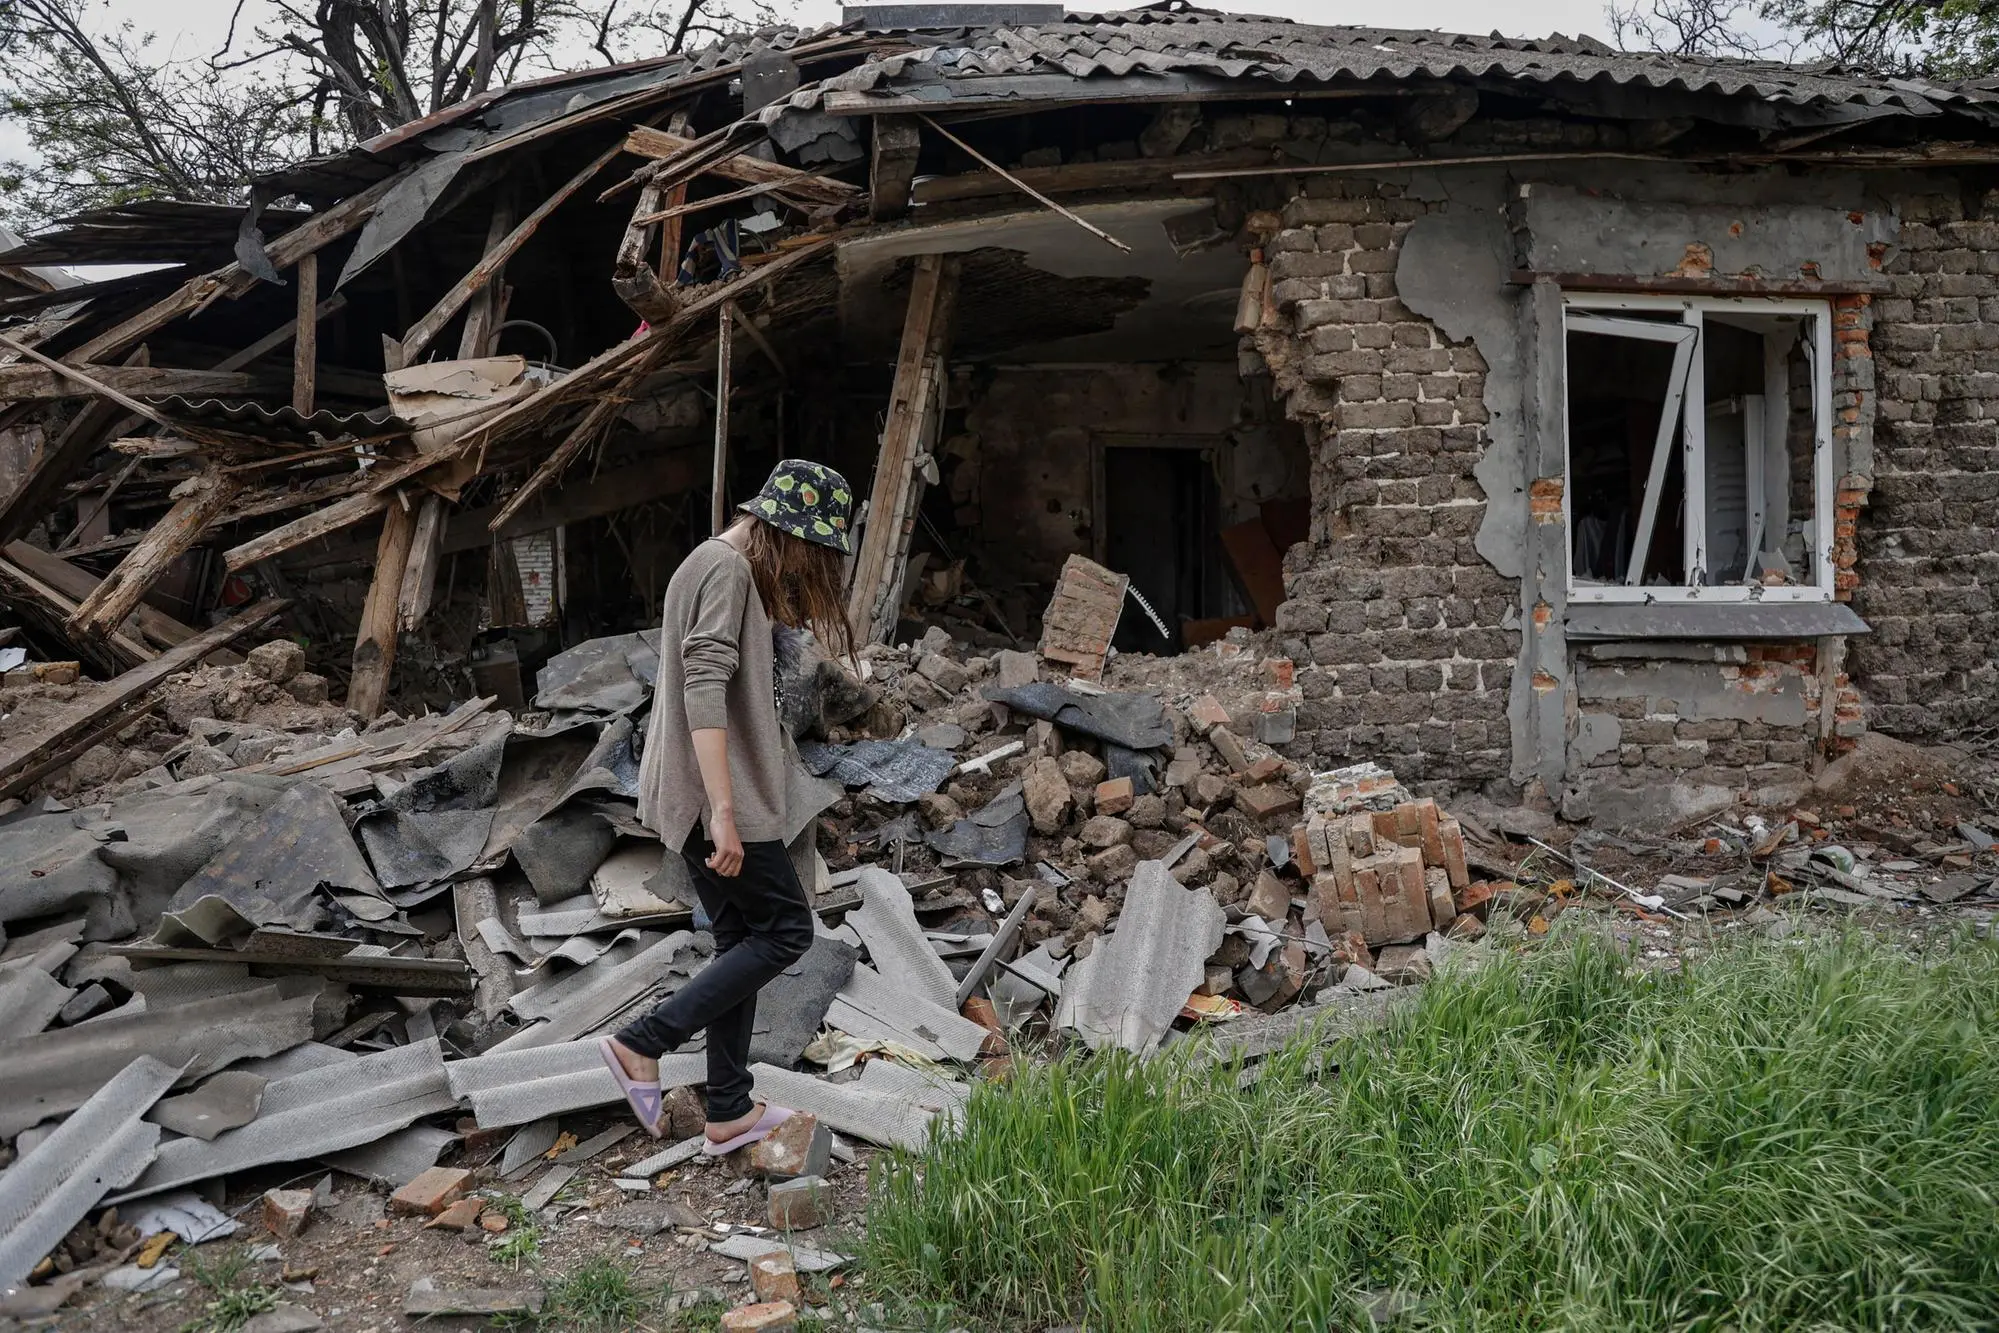 epa09965027 A woman walks past her destroyed house in Mariupol, Ukraine, 21 May 2022 (issued 22 May 2022). According to the Head of the self-proclaimed Donetsk People's Republic Denis Pushilin, 60 percent of the houses in Mariupol were destroyed, 20 percent of which cannot be rebuilt. The Chief spokesman of the Russian Defense Ministry, Major General Igor Konashenkov, said on 20 May that the long-besieged Azovstal steel plant in Mariupol was under full Russian army control. EPA/ALESSANDRO GUERRA